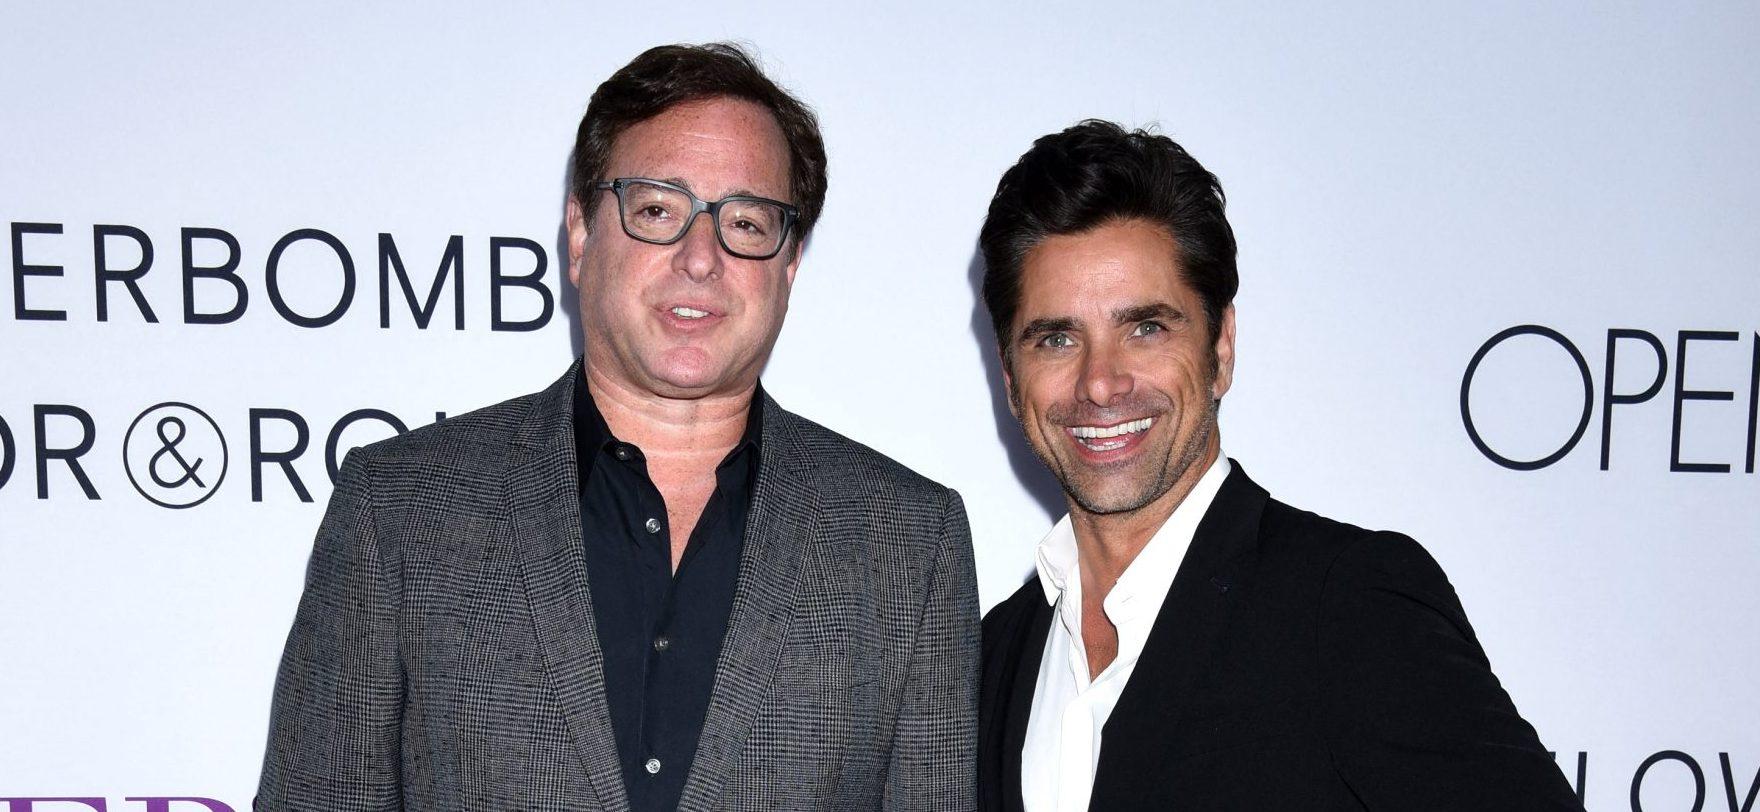 John Stamos Fondly Remembers When Late Bob Saget Met His Son Billy